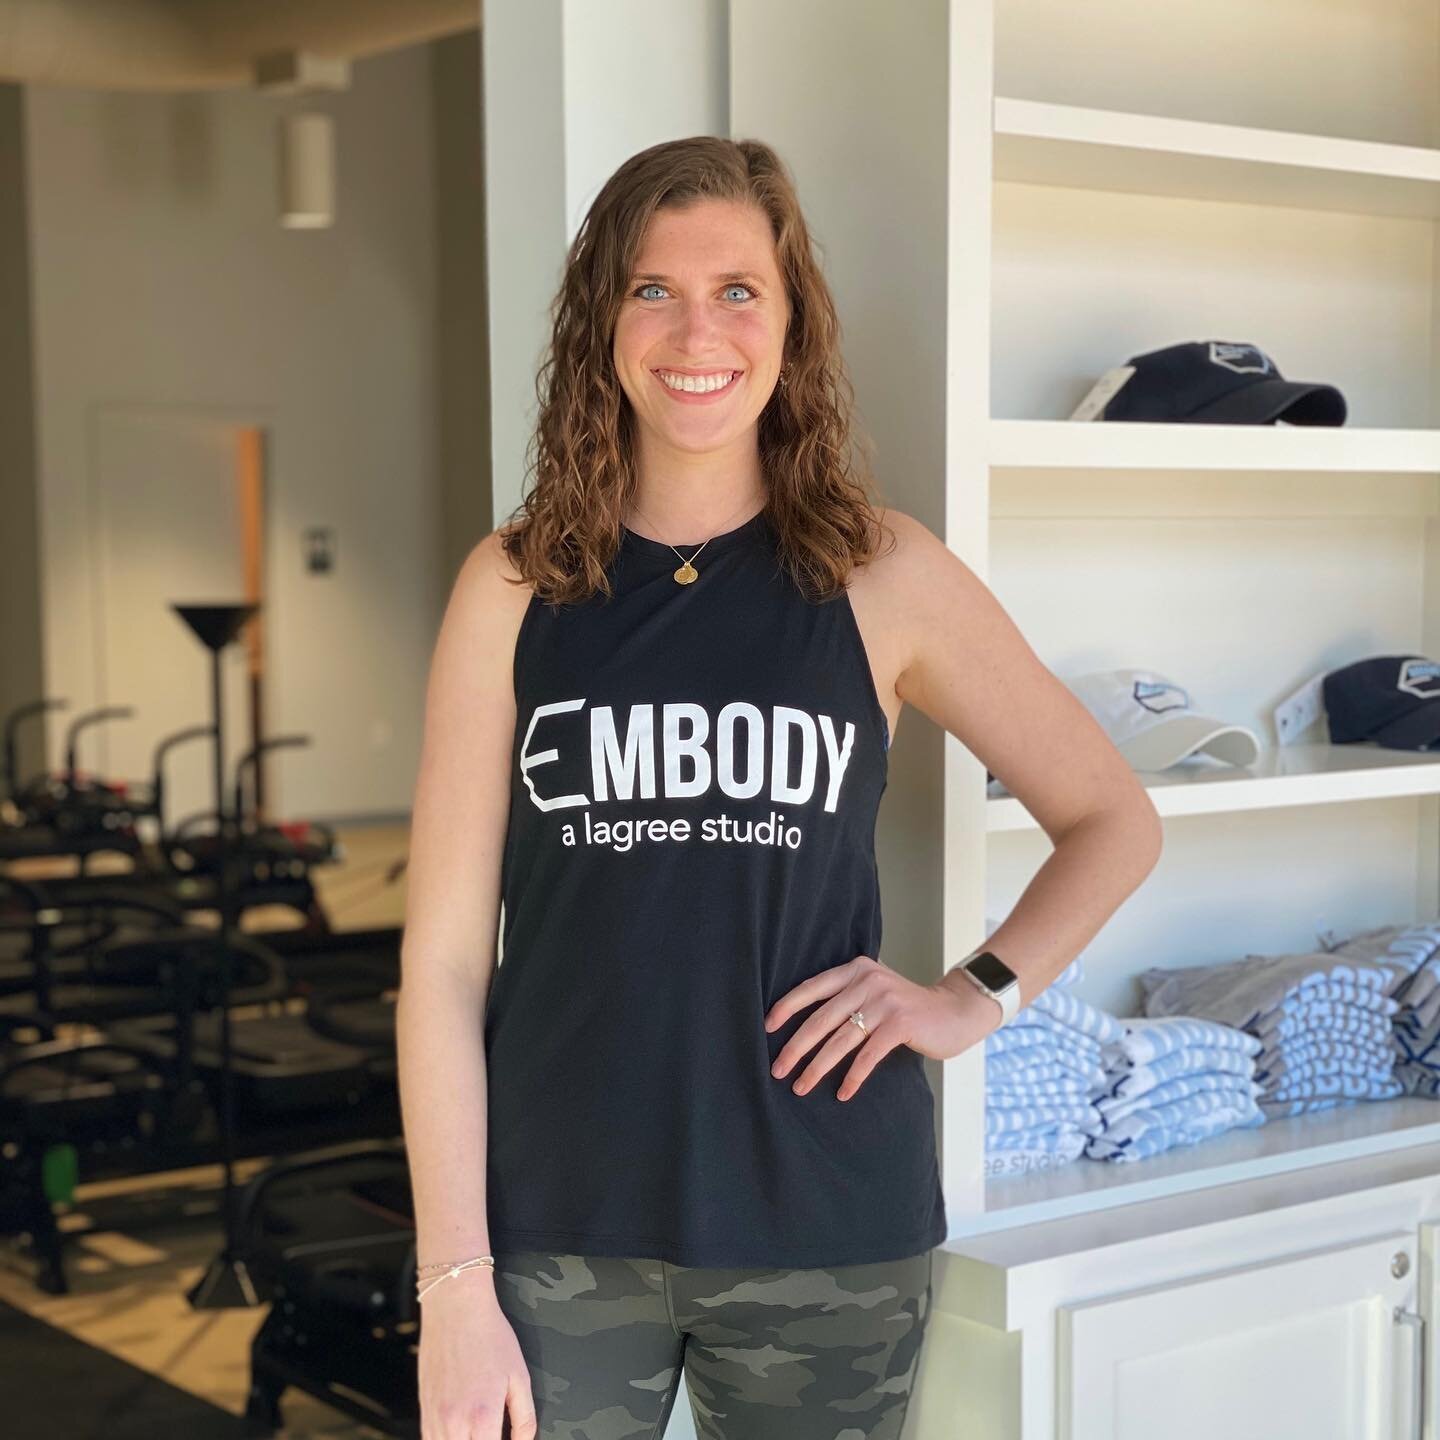 Everyone give a warm welcome back to Erin!

Erin tried Lagree for the first time at Embody in February of 2020 and after her first class, she was hooked! Lagree was the exact type of workout she was looking for, high-intensity yet low-impact and easy